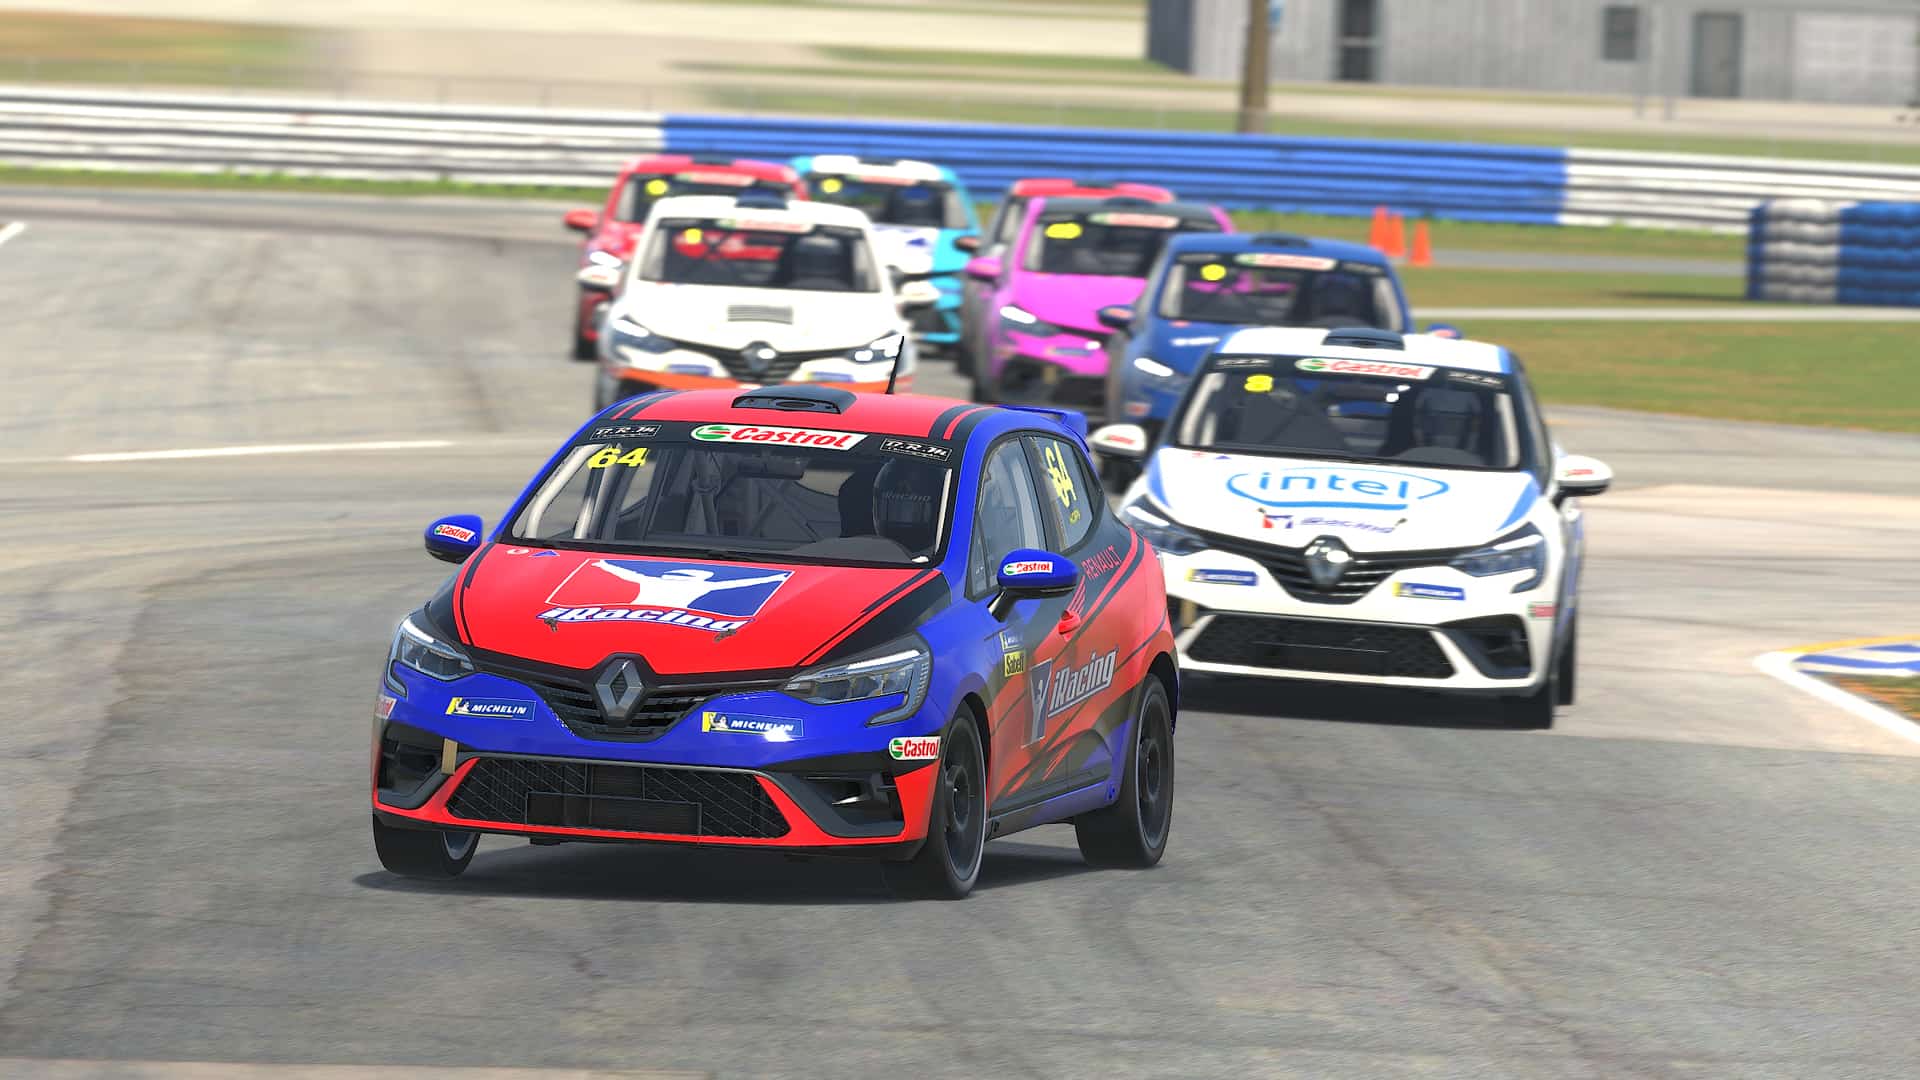 a pack of Renault Clio cup cars on iracing